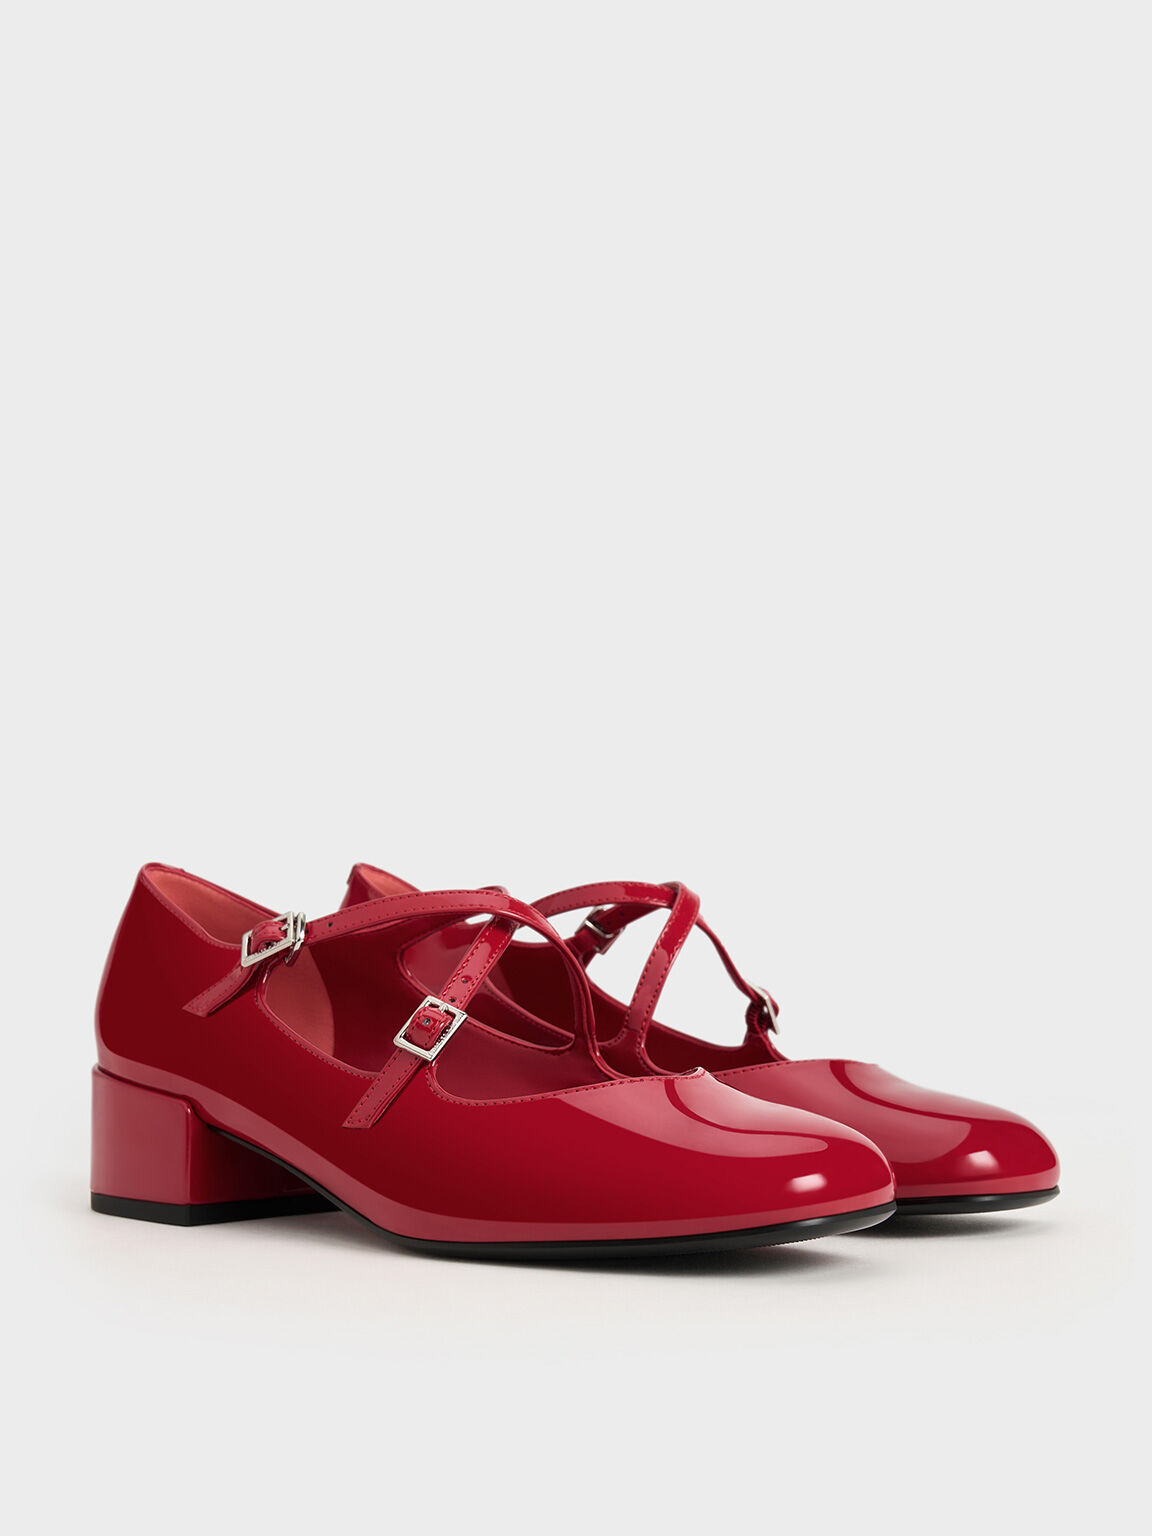 Patent Crossover-Strap Block-Heel Mary Janes, Red, hi-res